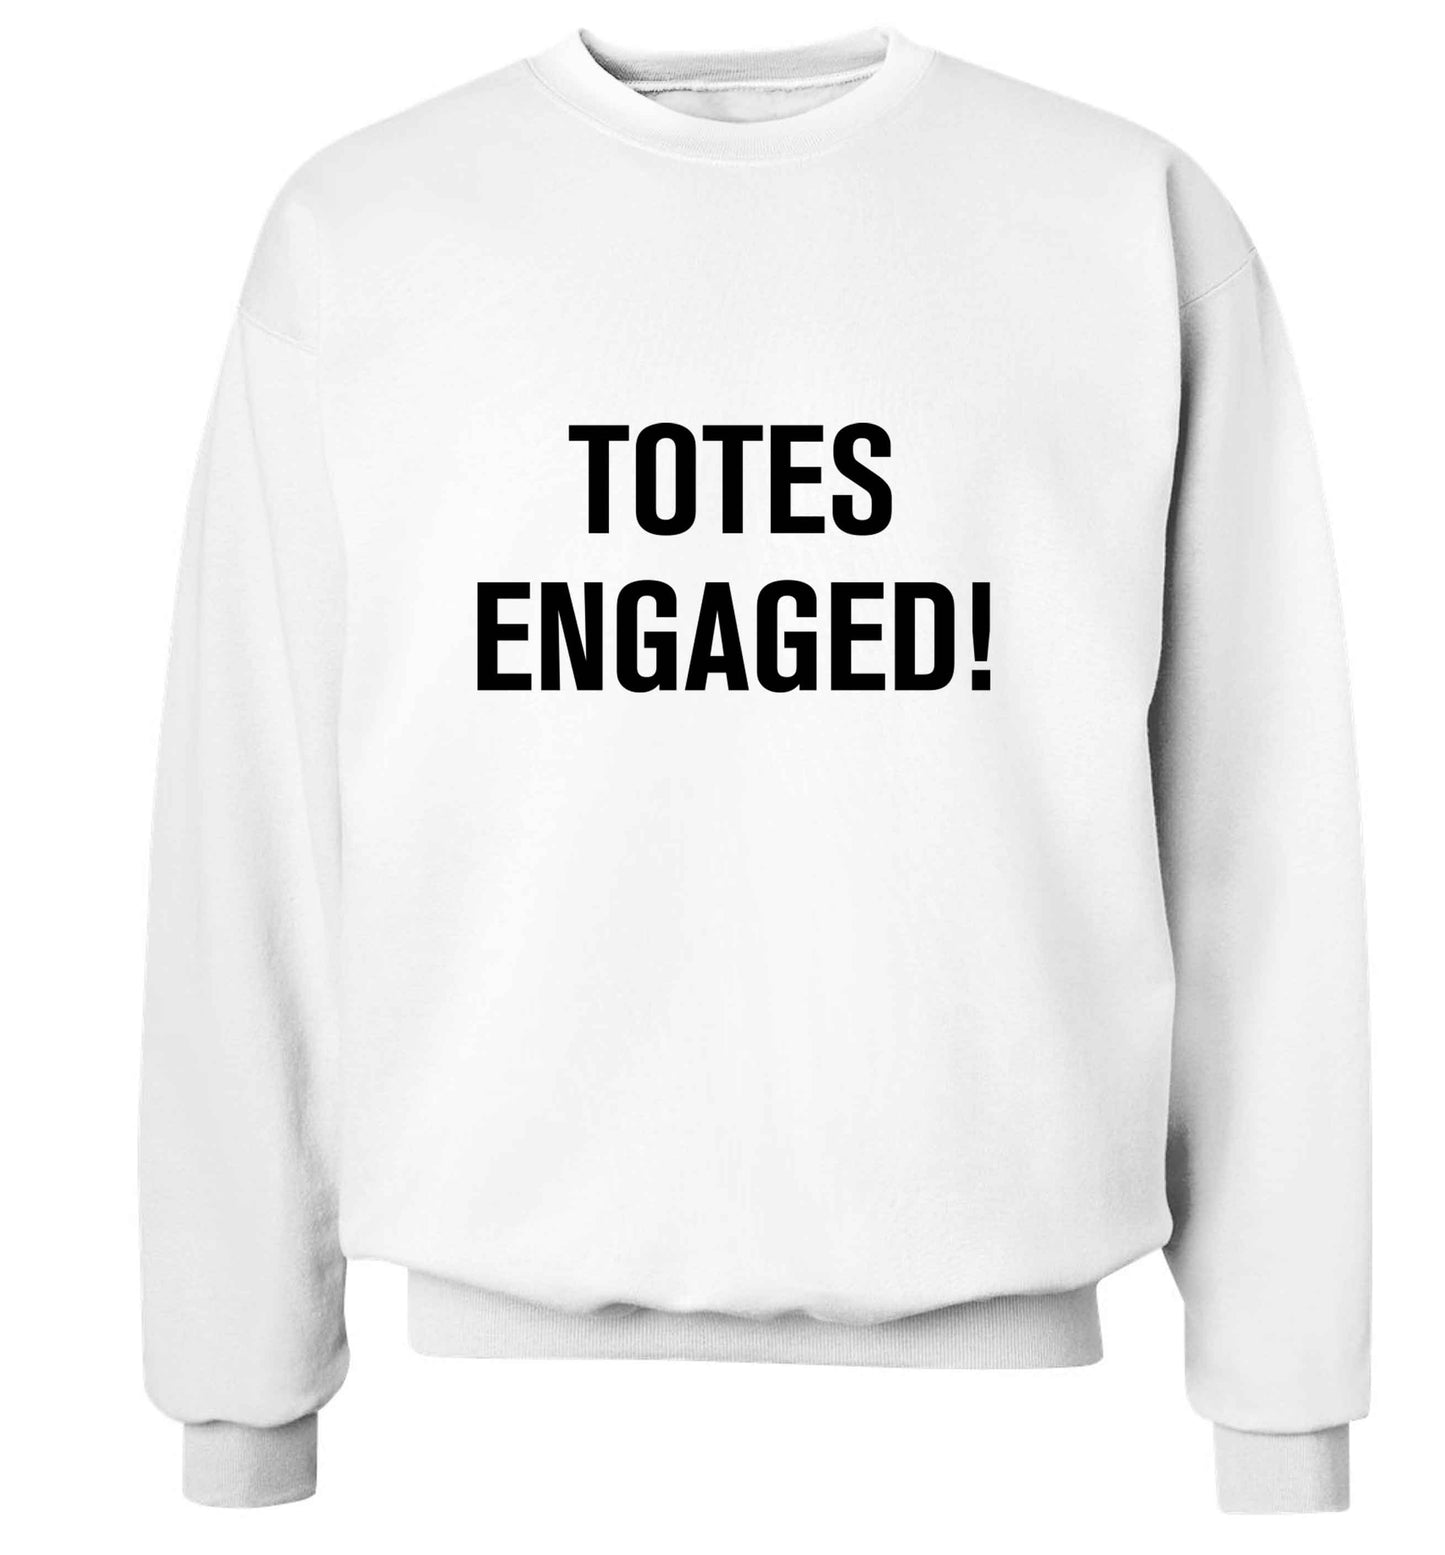 Totes engaged adult's unisex white sweater 2XL